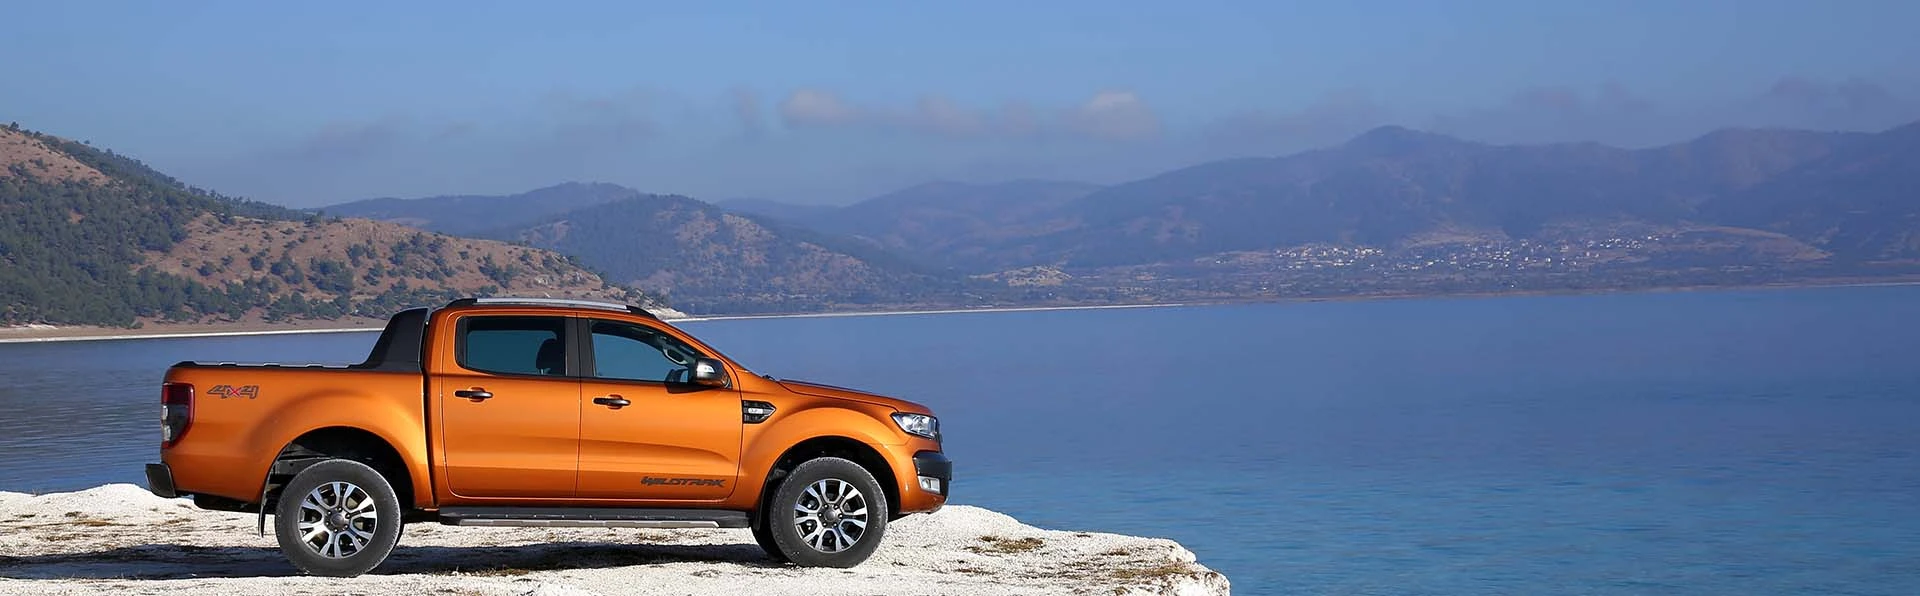 Ford Ranger Lease Review